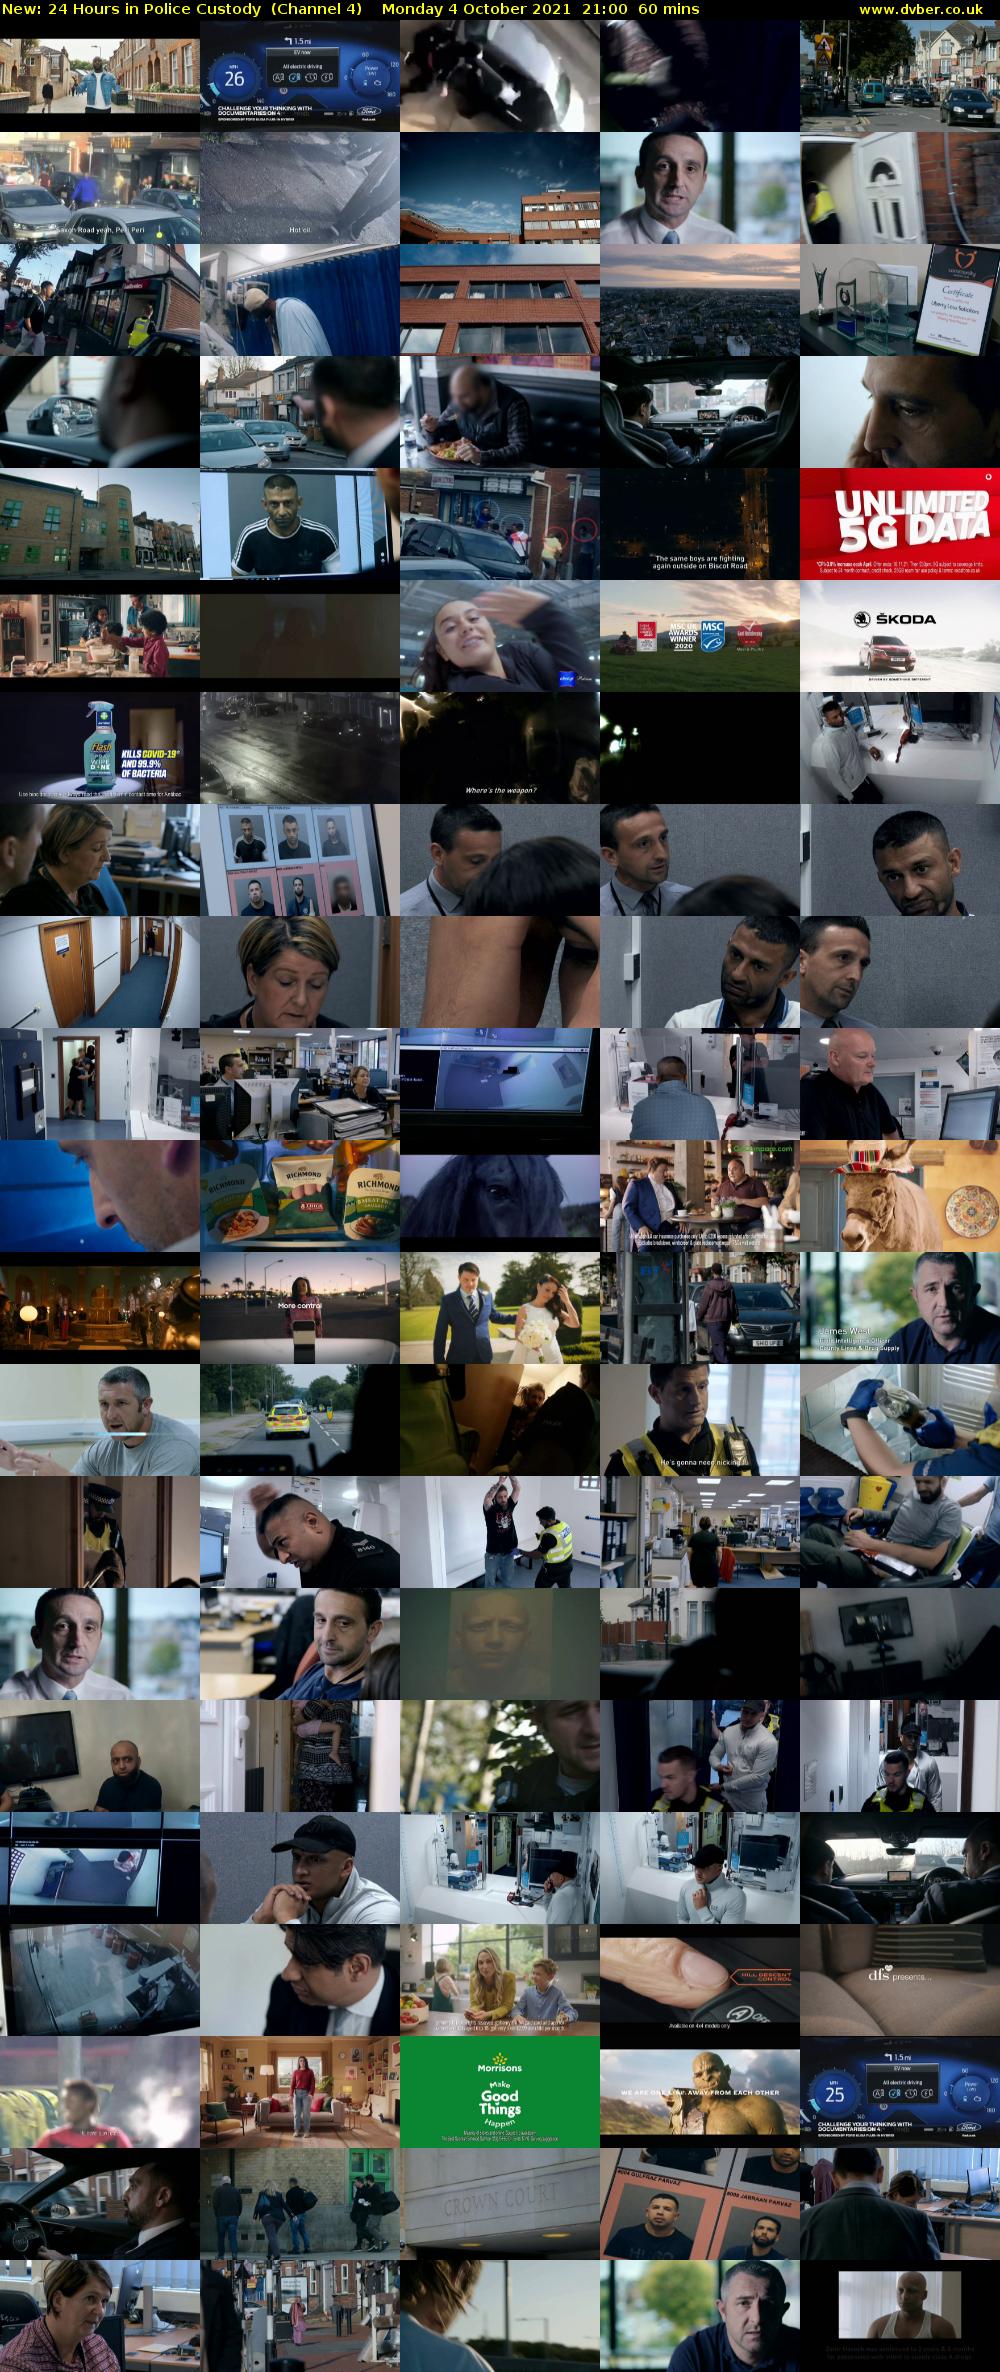 24 Hours in Police Custody (Channel 4) Monday 4 October 2021 21:00 - 22:00